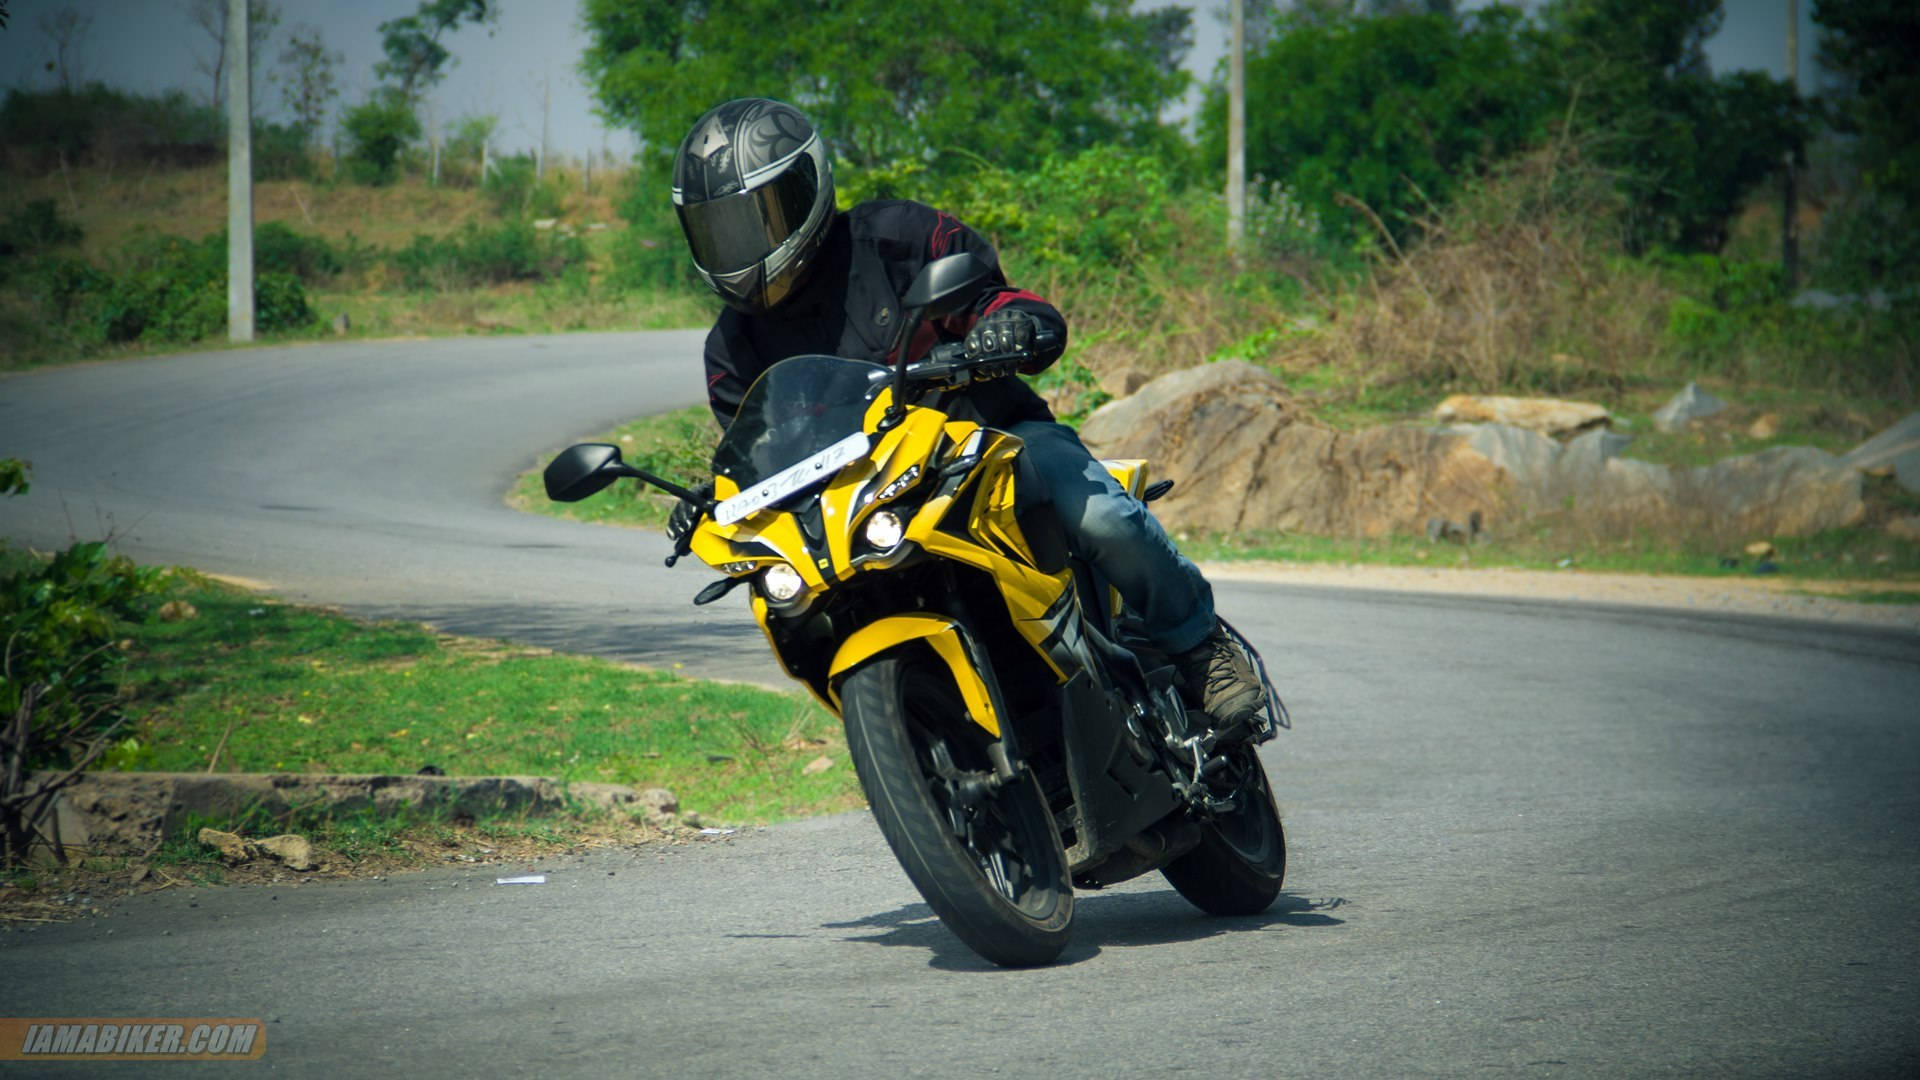 Smooth Pulsar Rs200 Ride Background